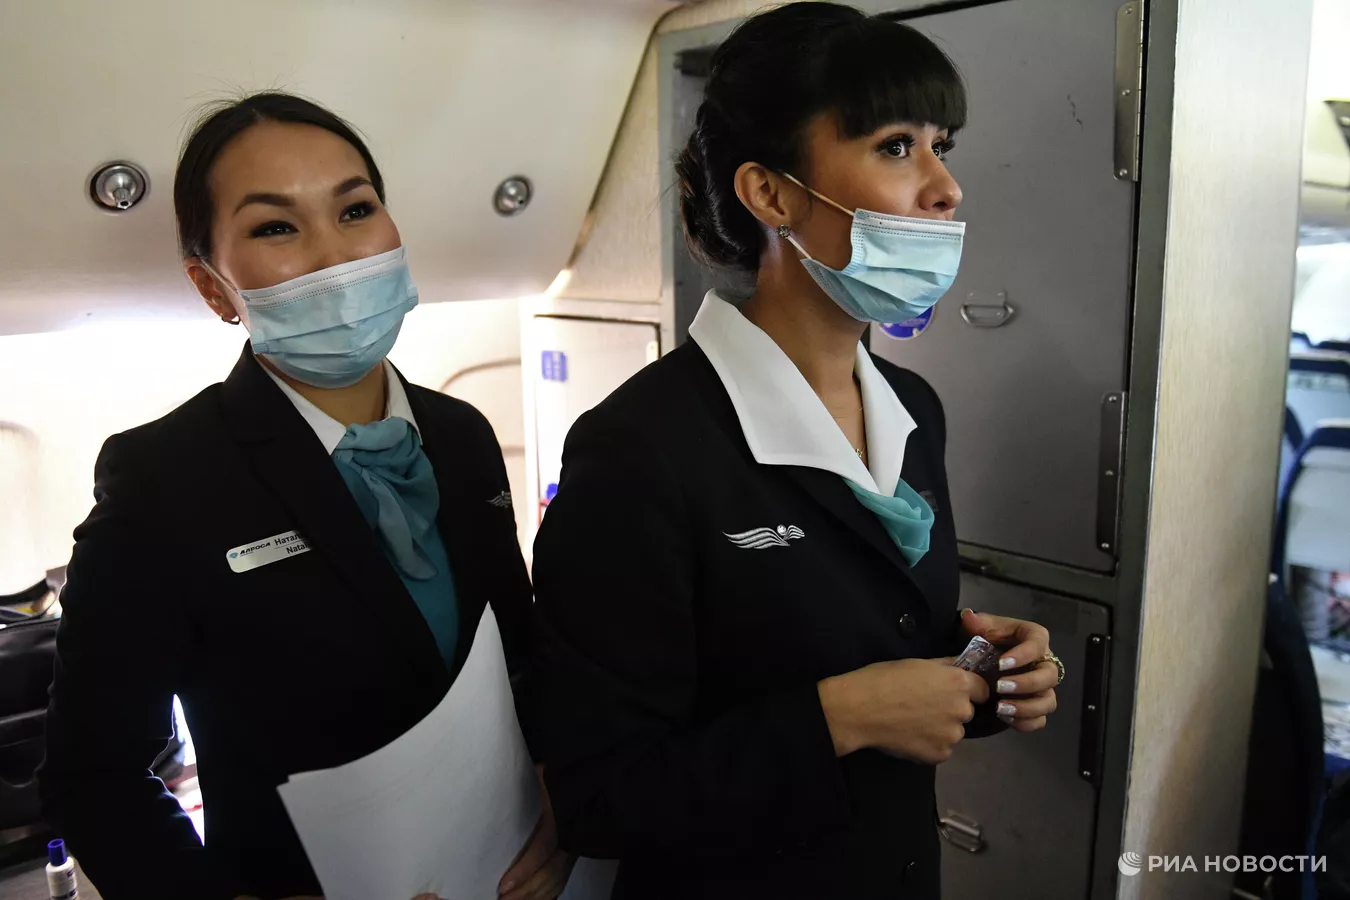 two women wearing masks and standing in an airplane